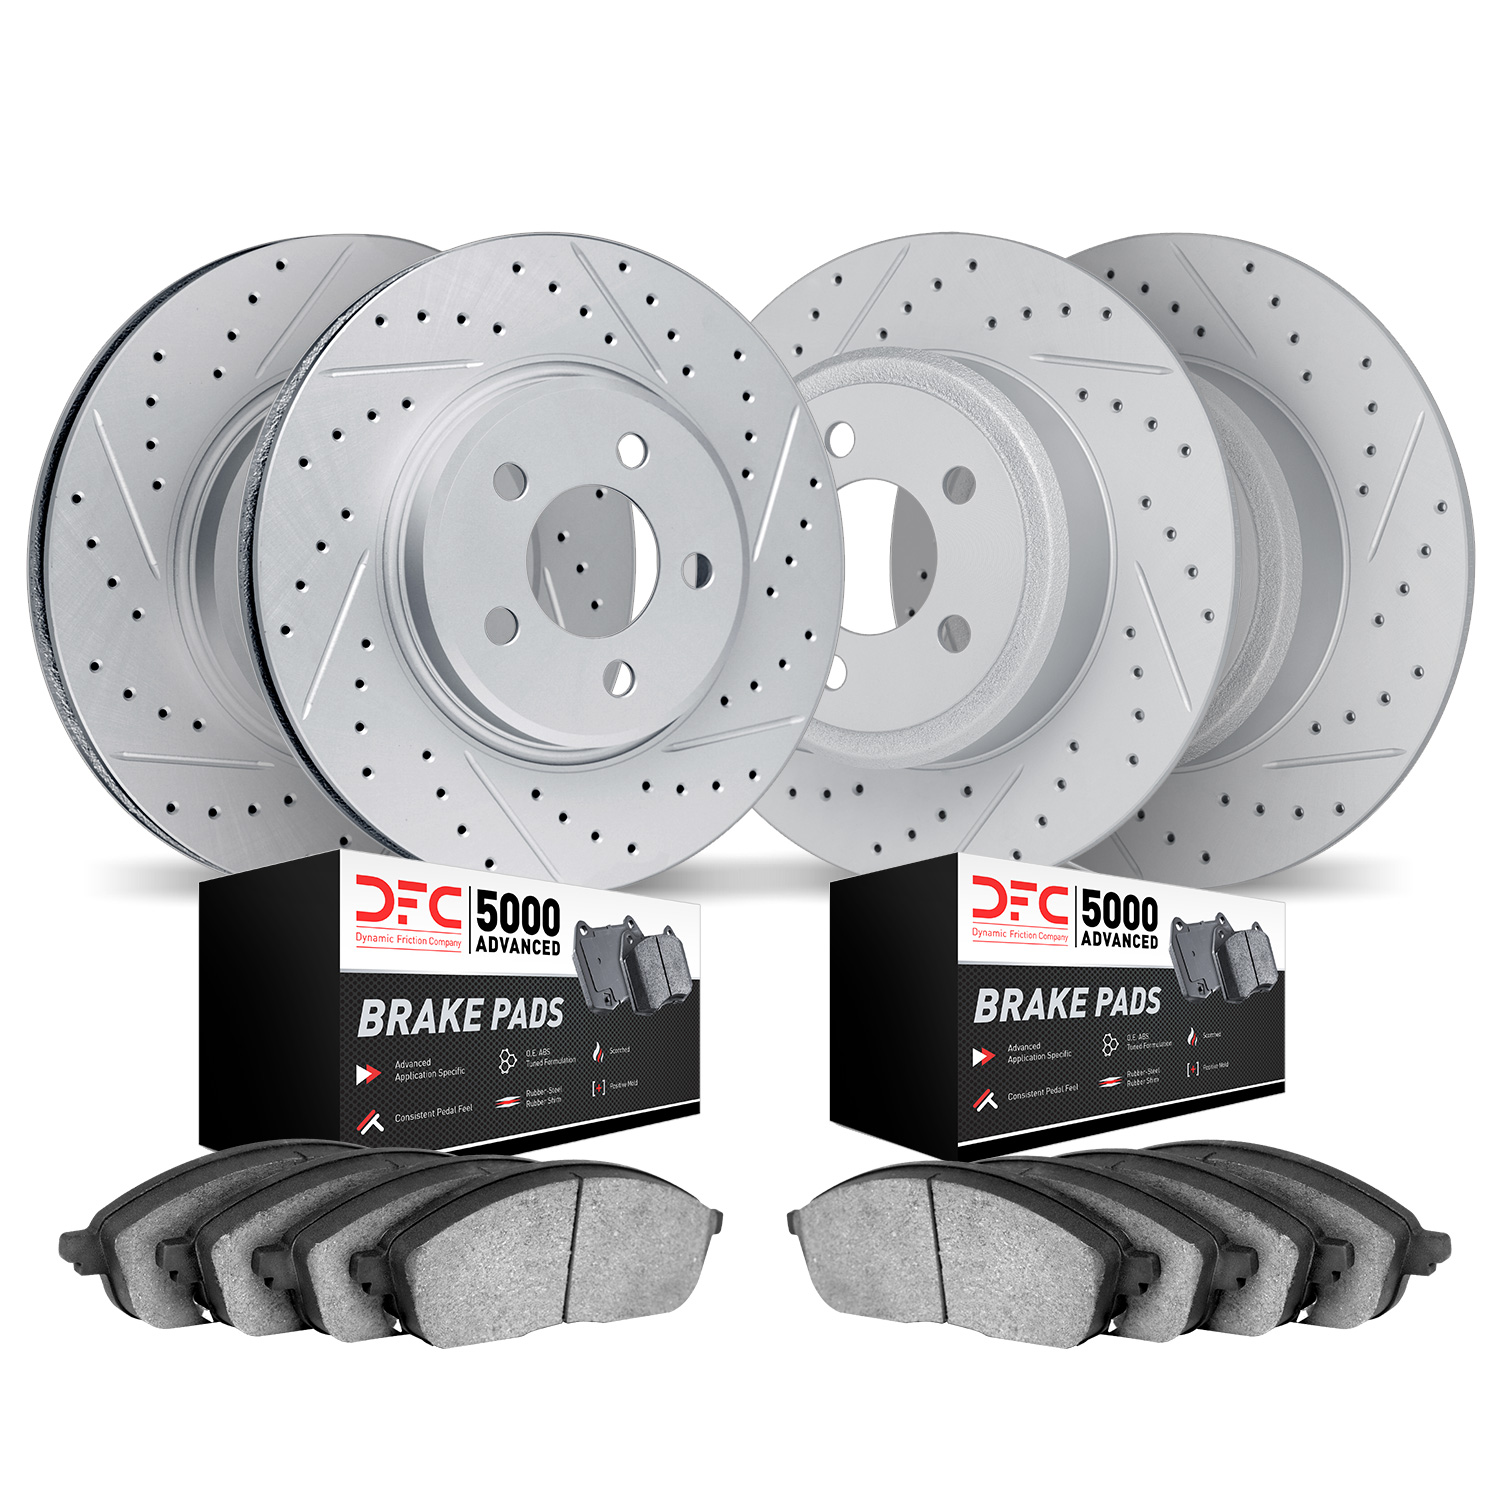 2504-47265 Geoperformance Drilled/Slotted Rotors w/5000 Advanced Brake Pads Kit, 2009-2010 GM, Position: Front and Rear